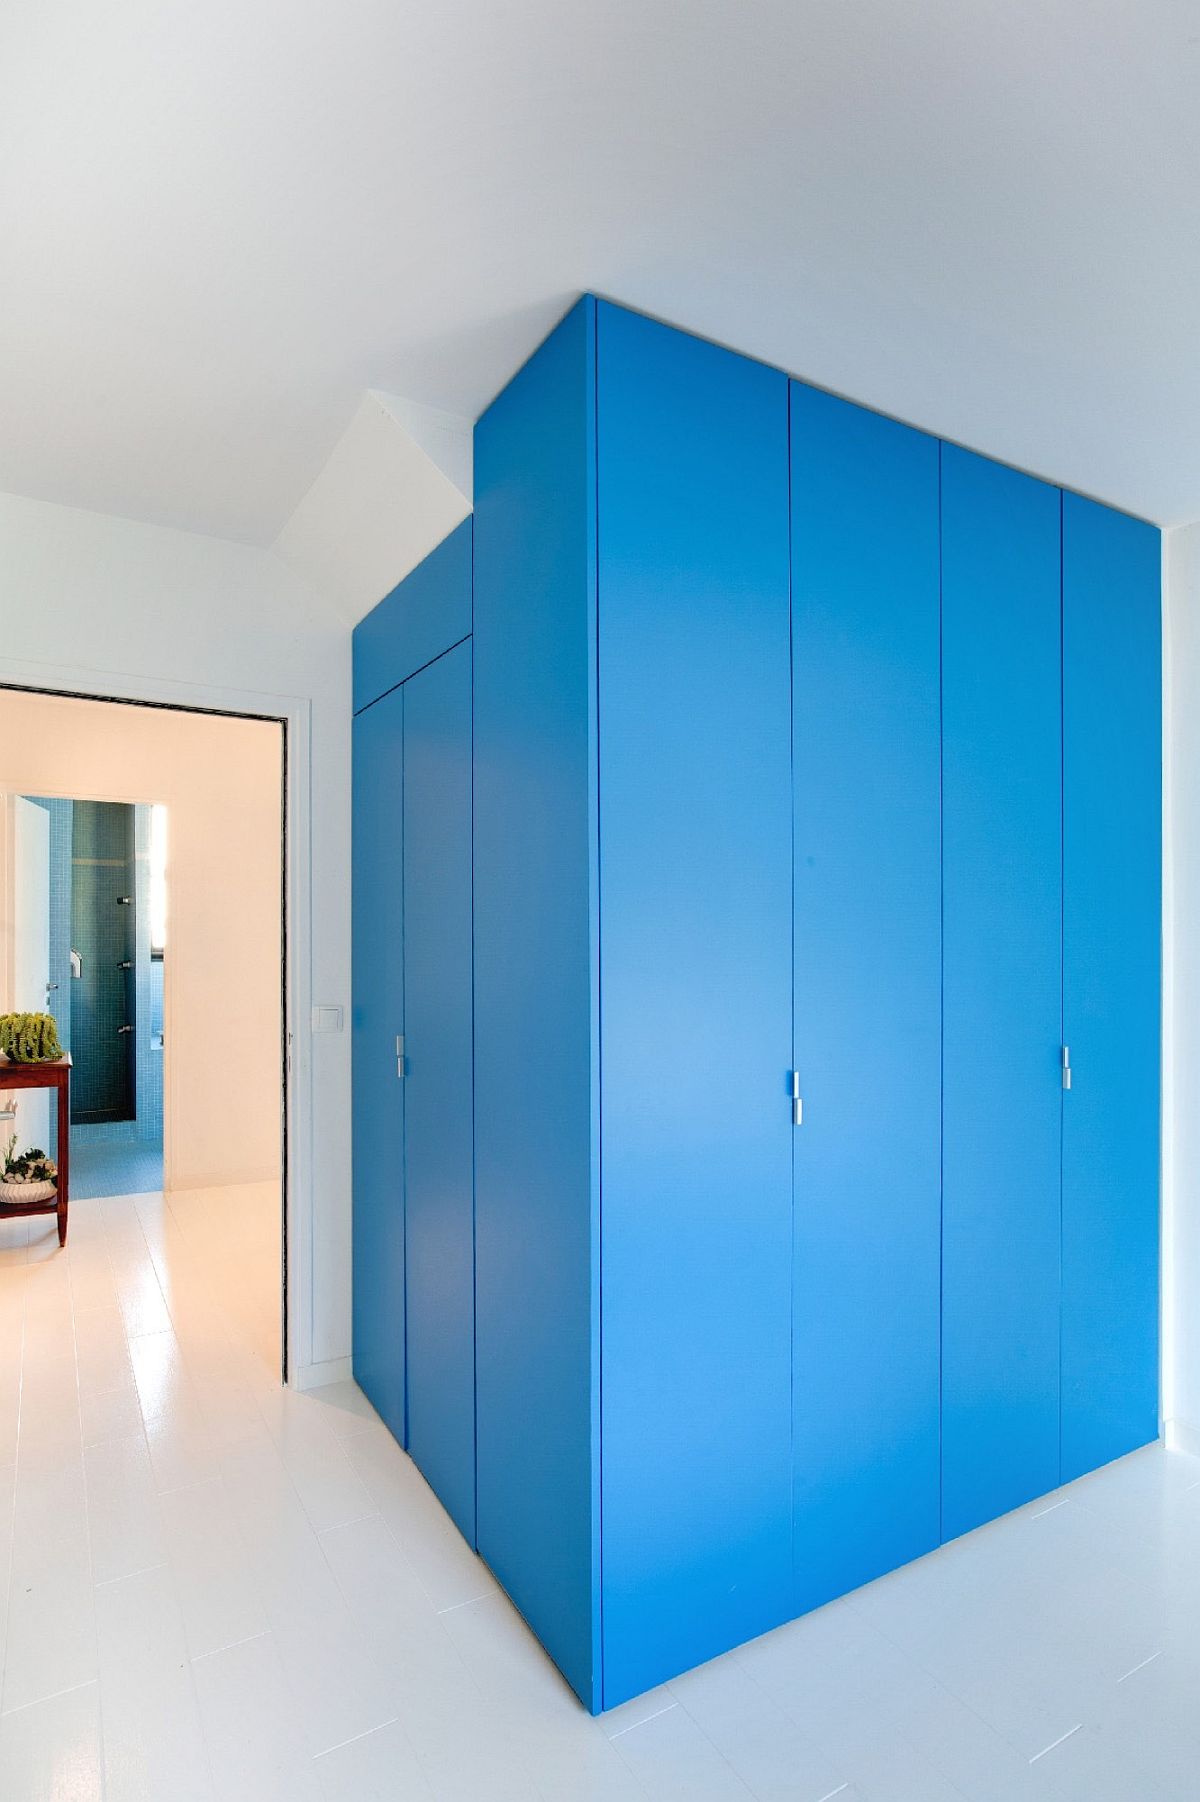 Custom units and smart rooms create a colorful and classy interior